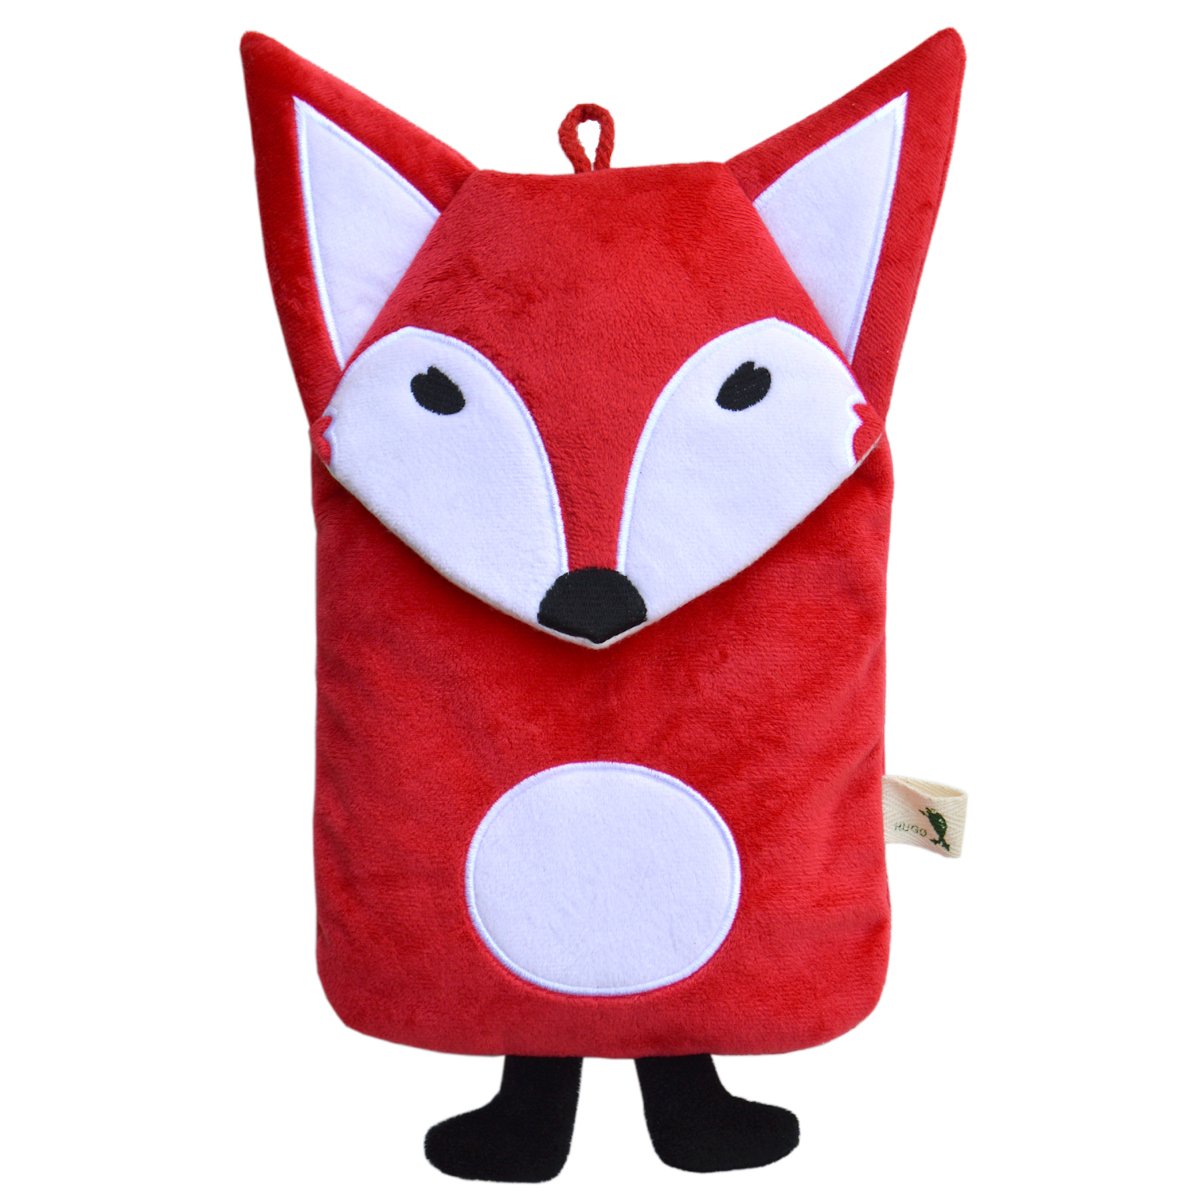 Child's Hot Water Bottle with Organic Cotton Cover